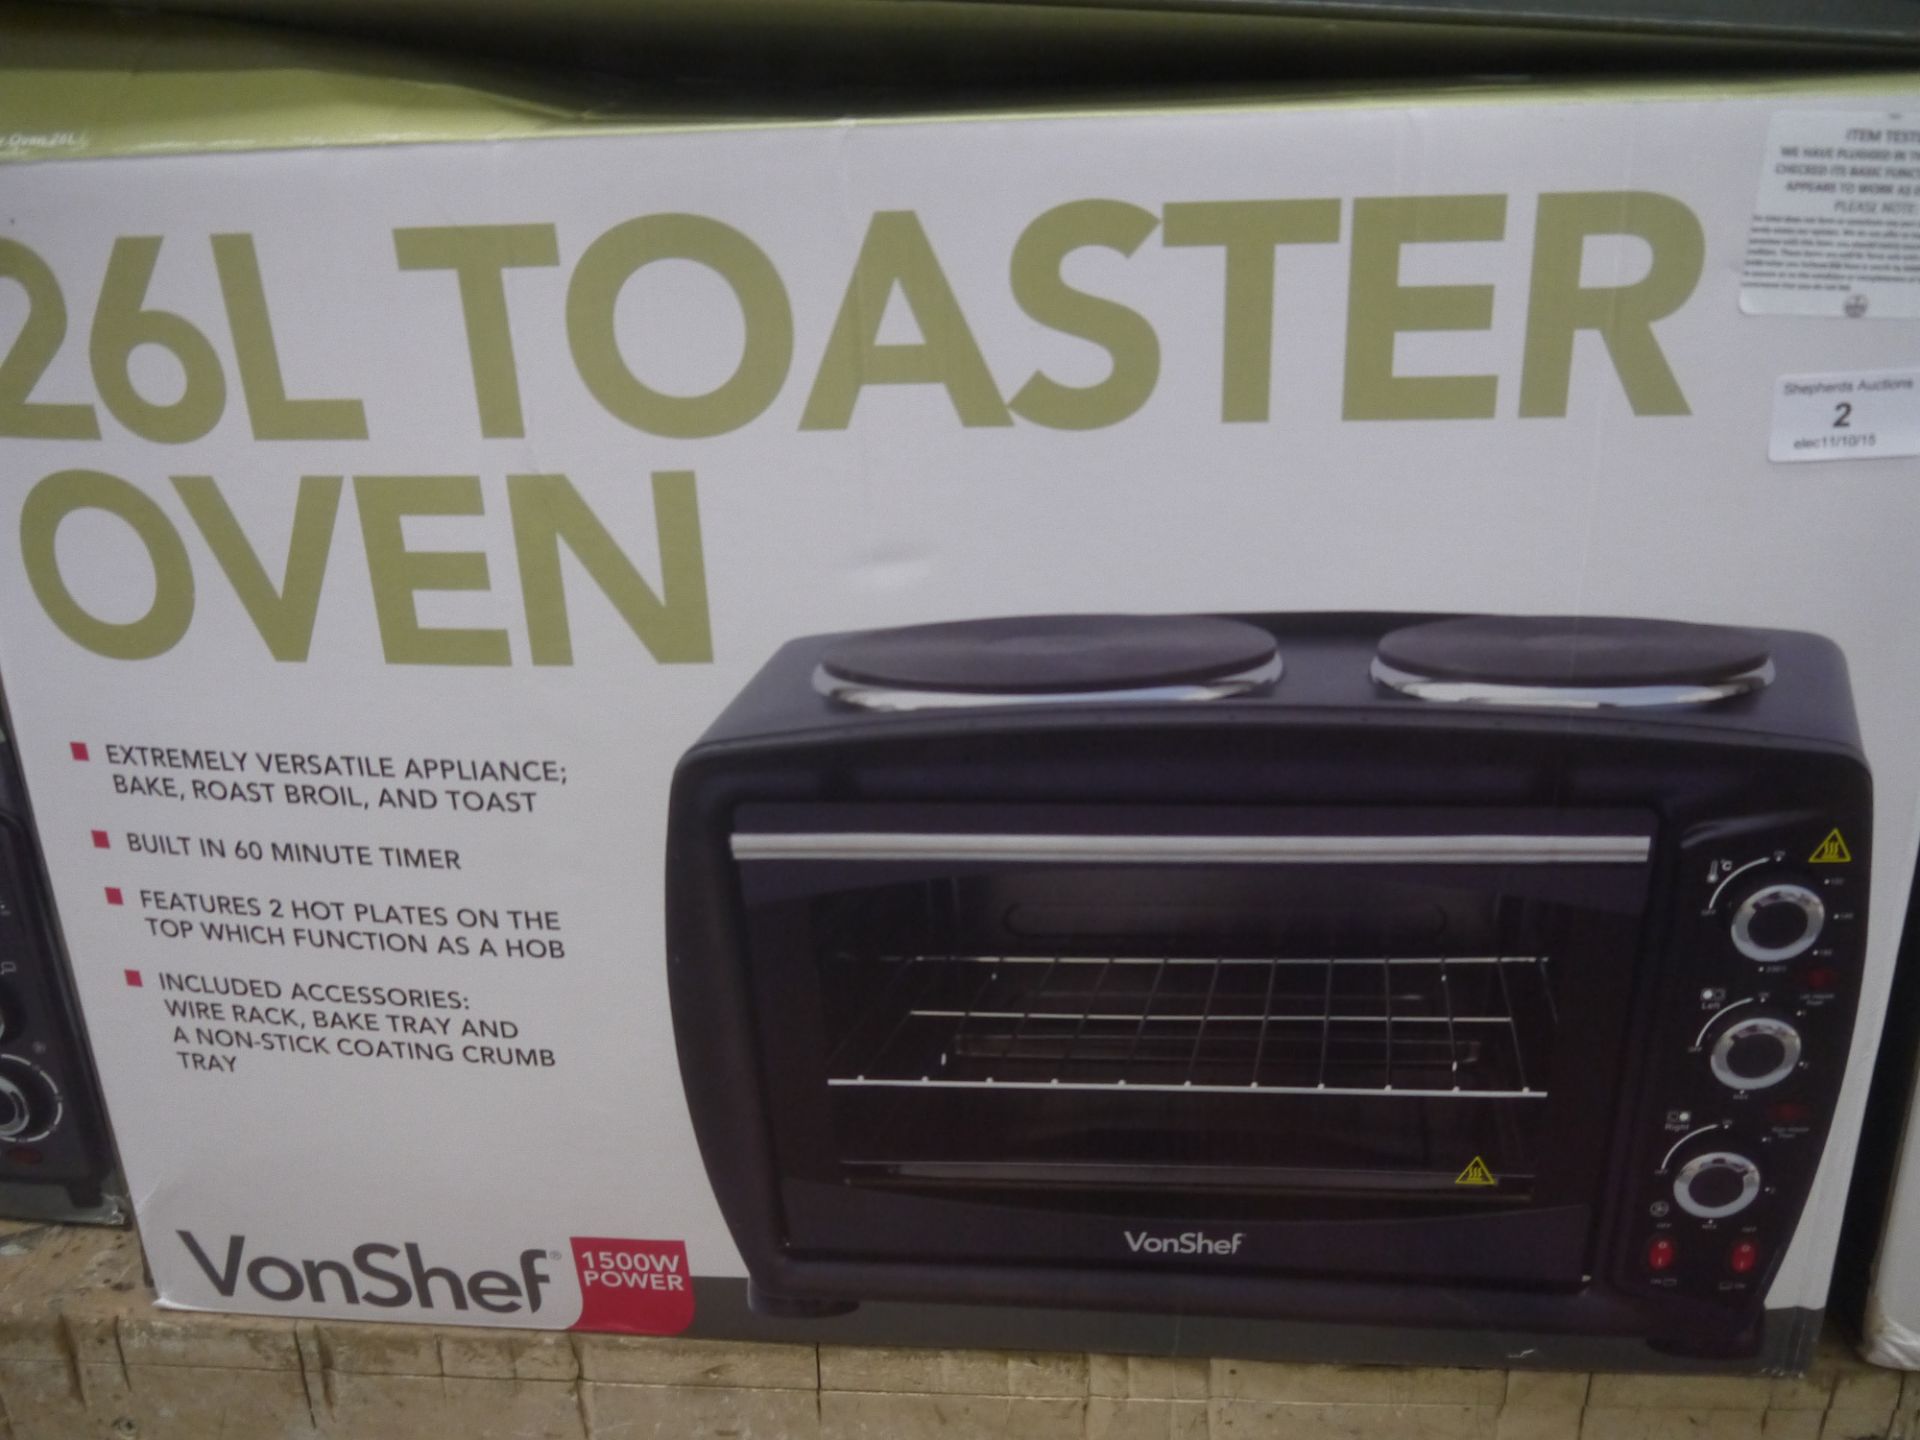 VonHaus 26 Litre Toaster Oven. Tested working and boxed